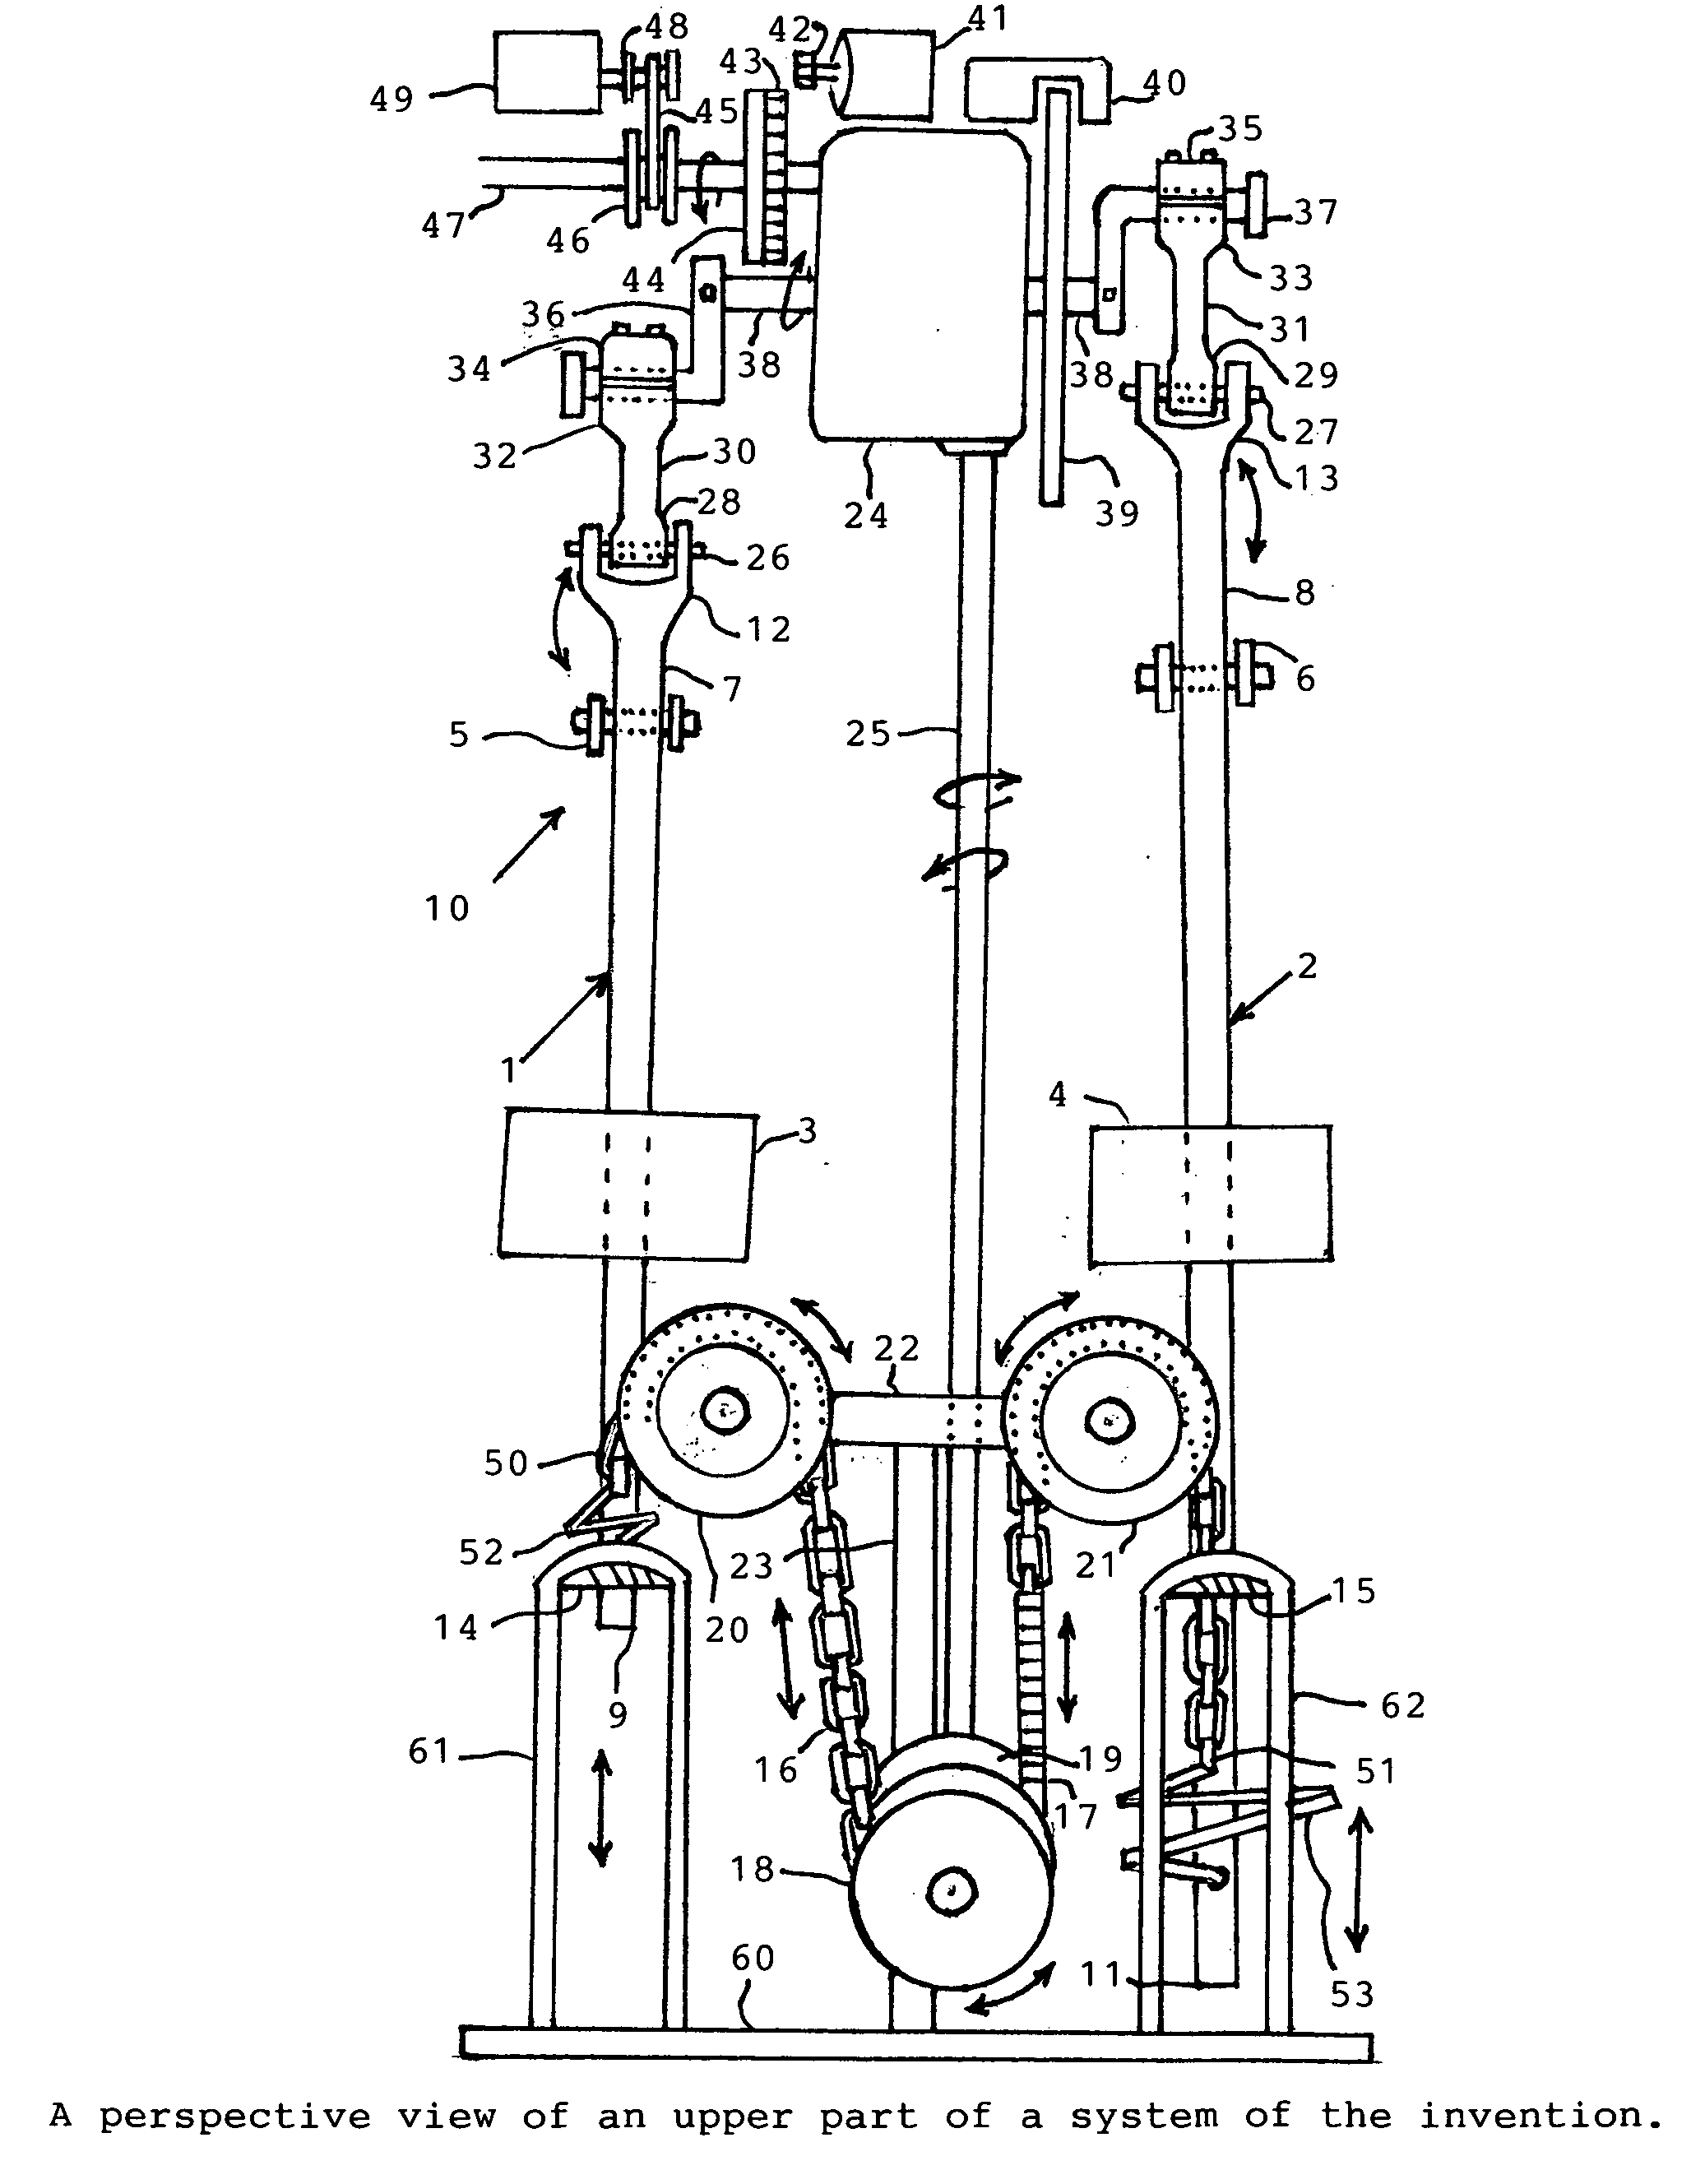 Transportation and power generating system of gravity and leaf springs